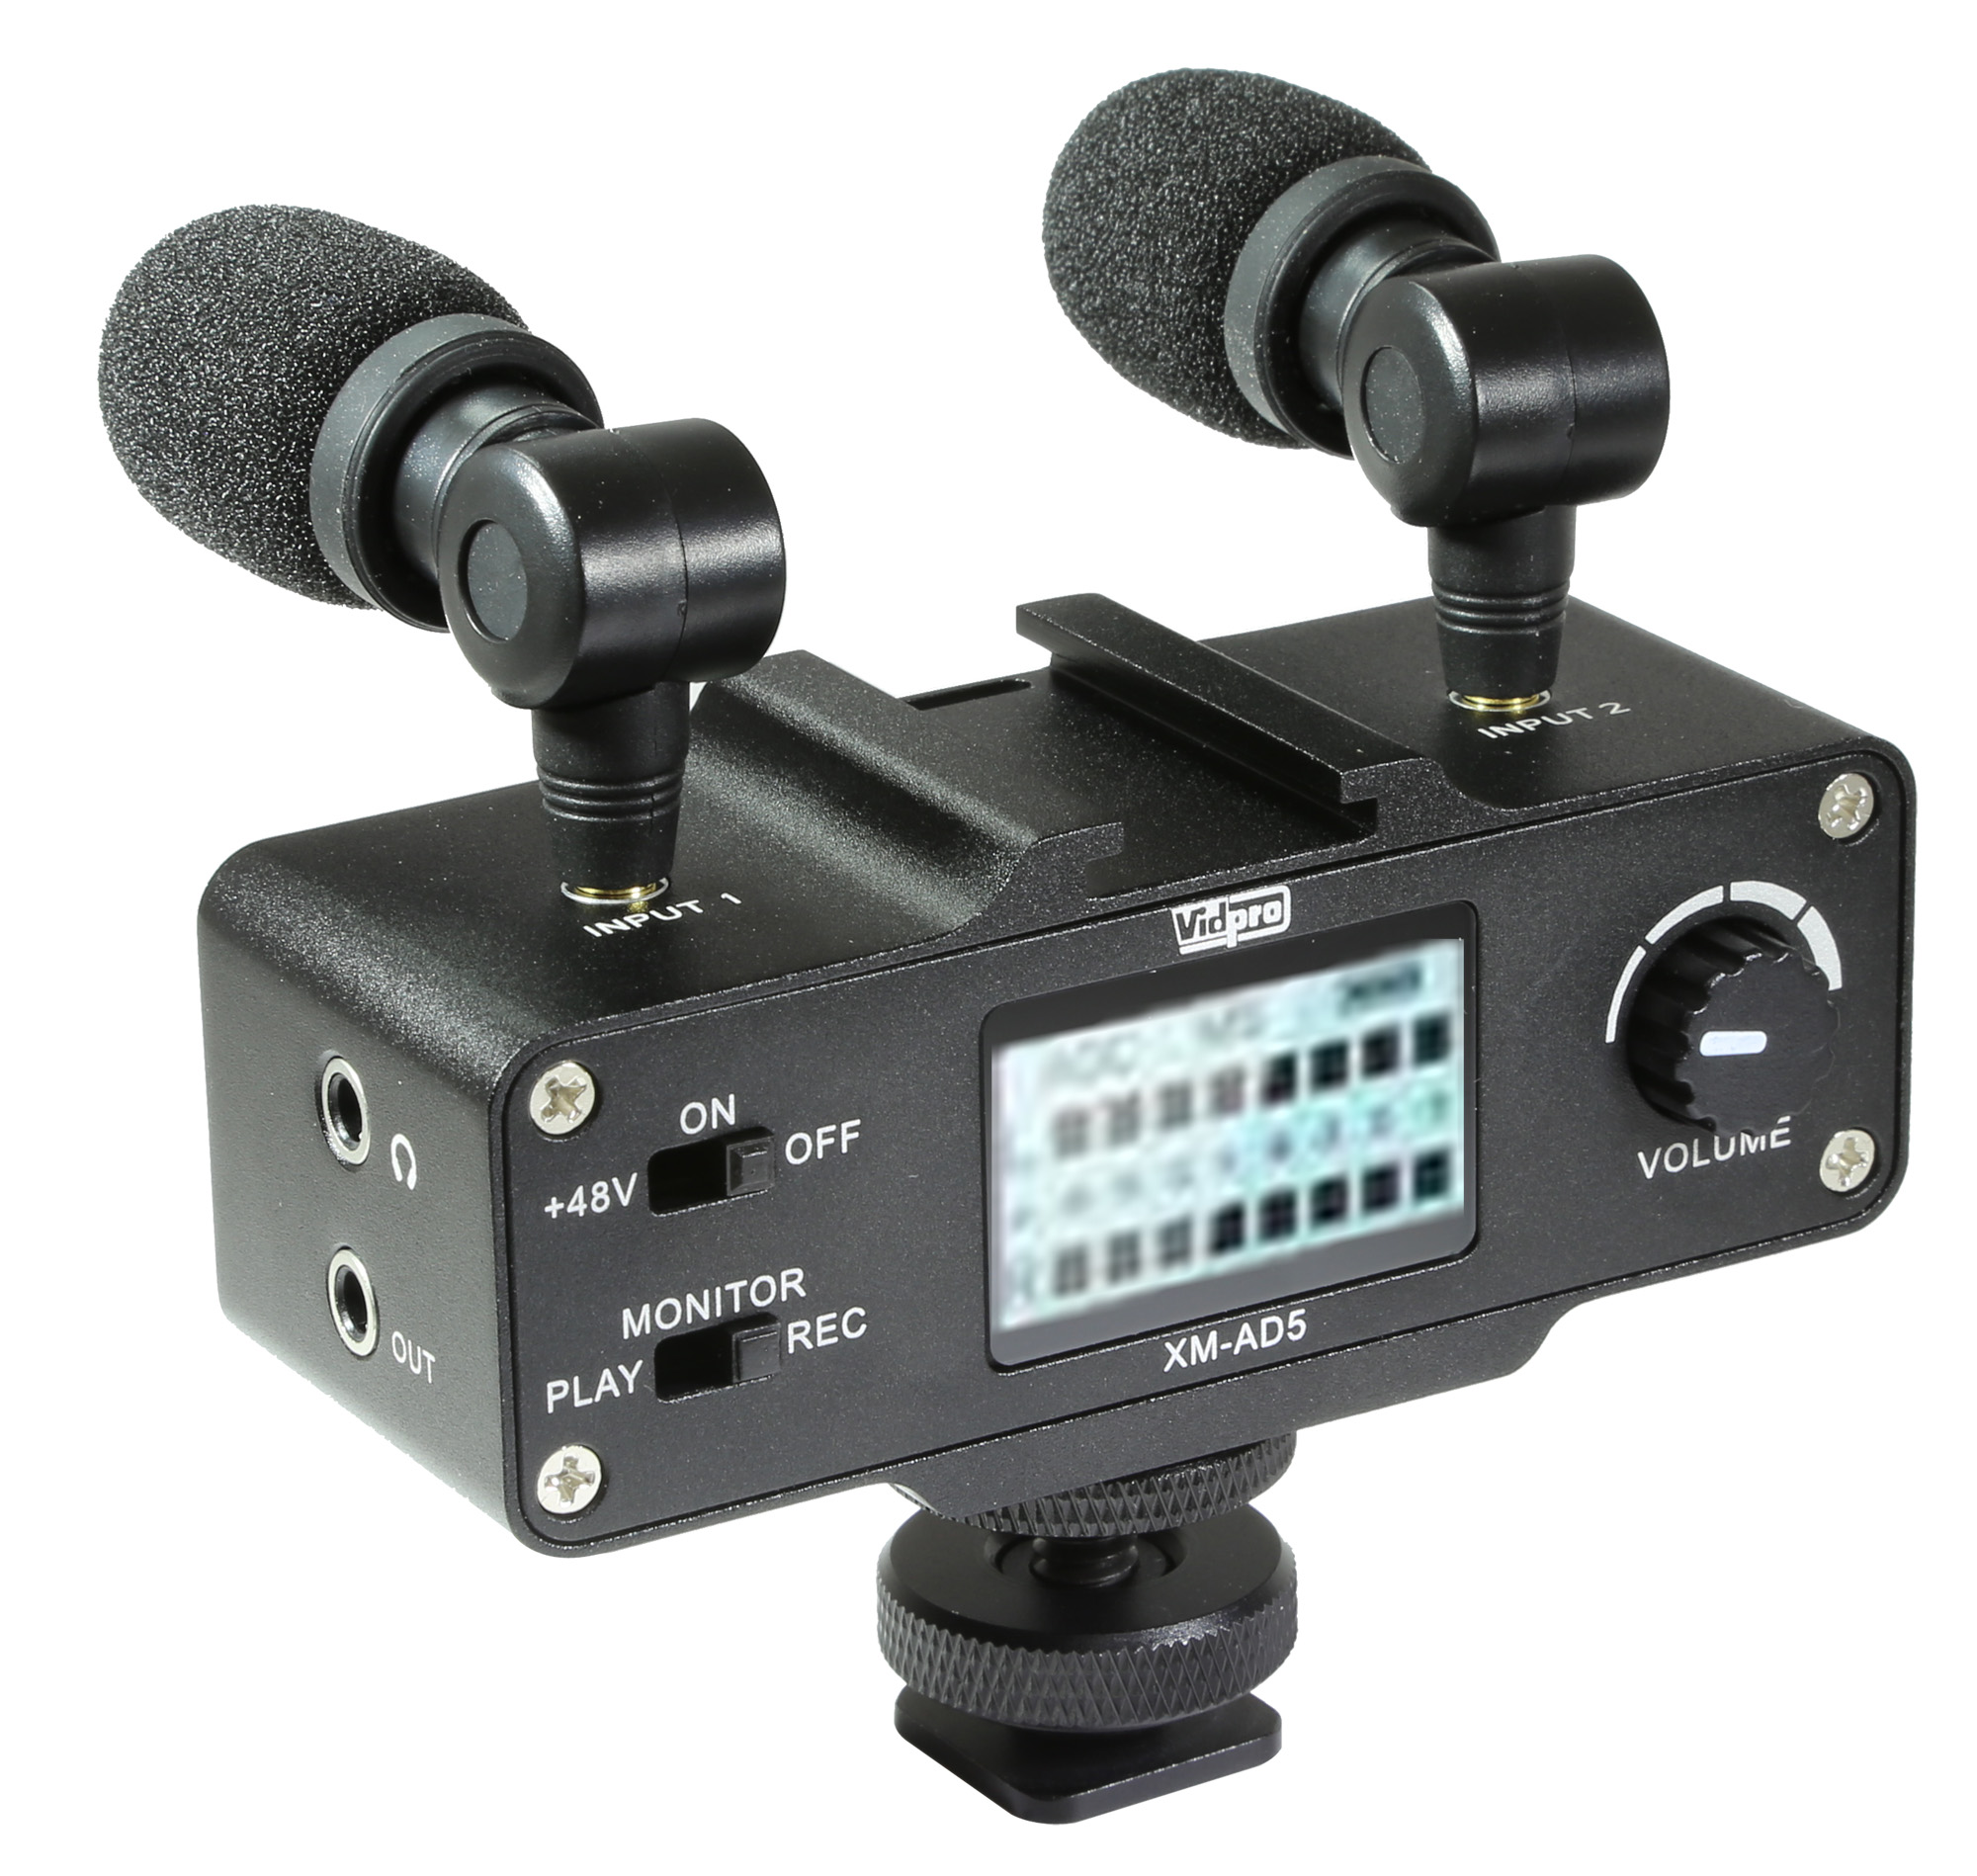 External Microphone for HitachiCamcorder